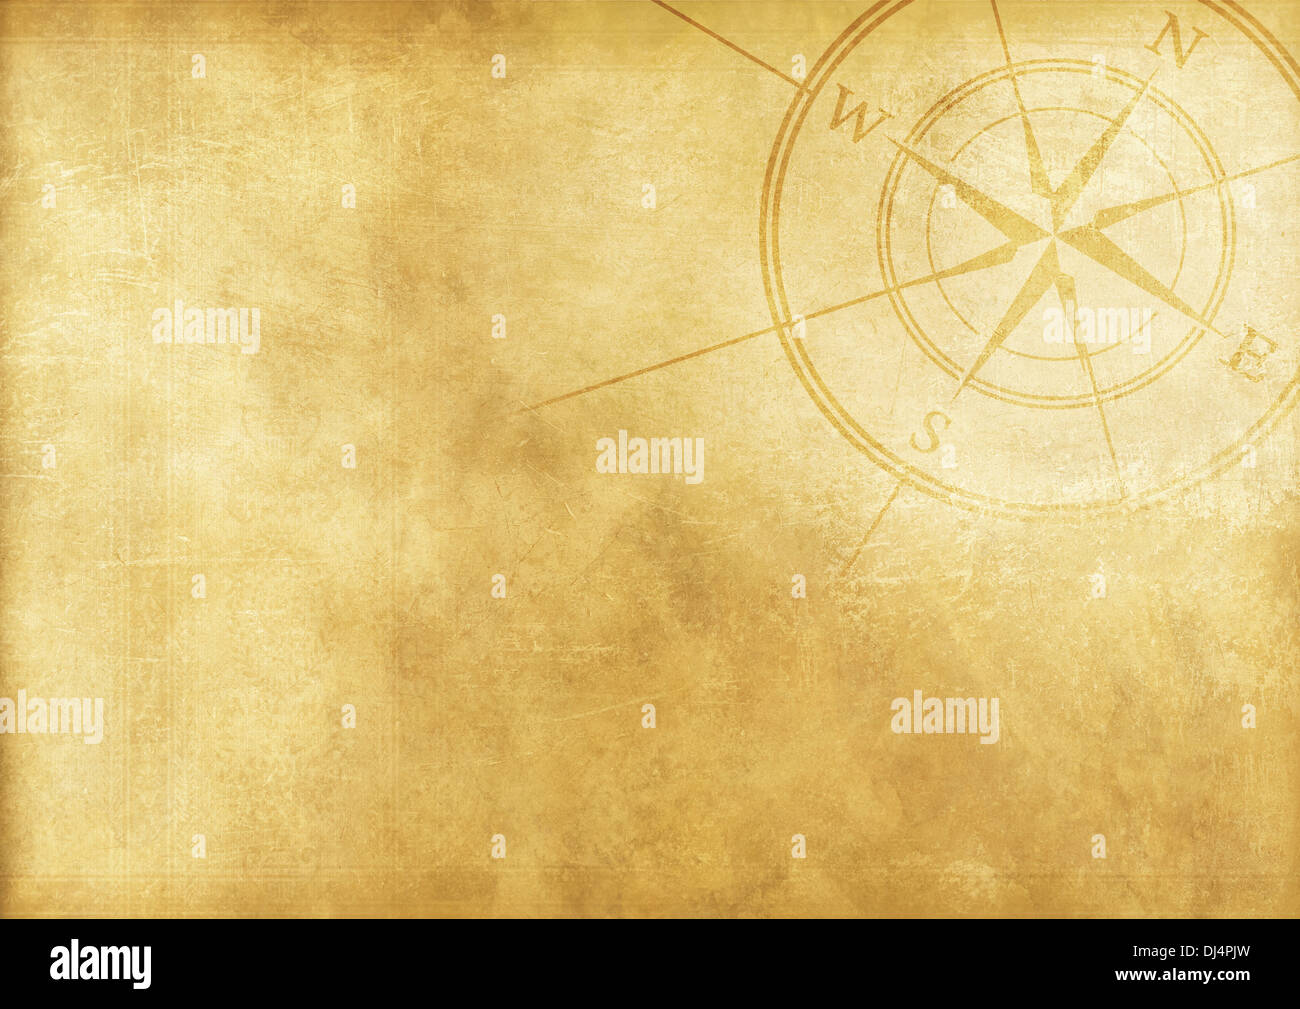 Vintage Journey Background With Compass Rose Aged Paper